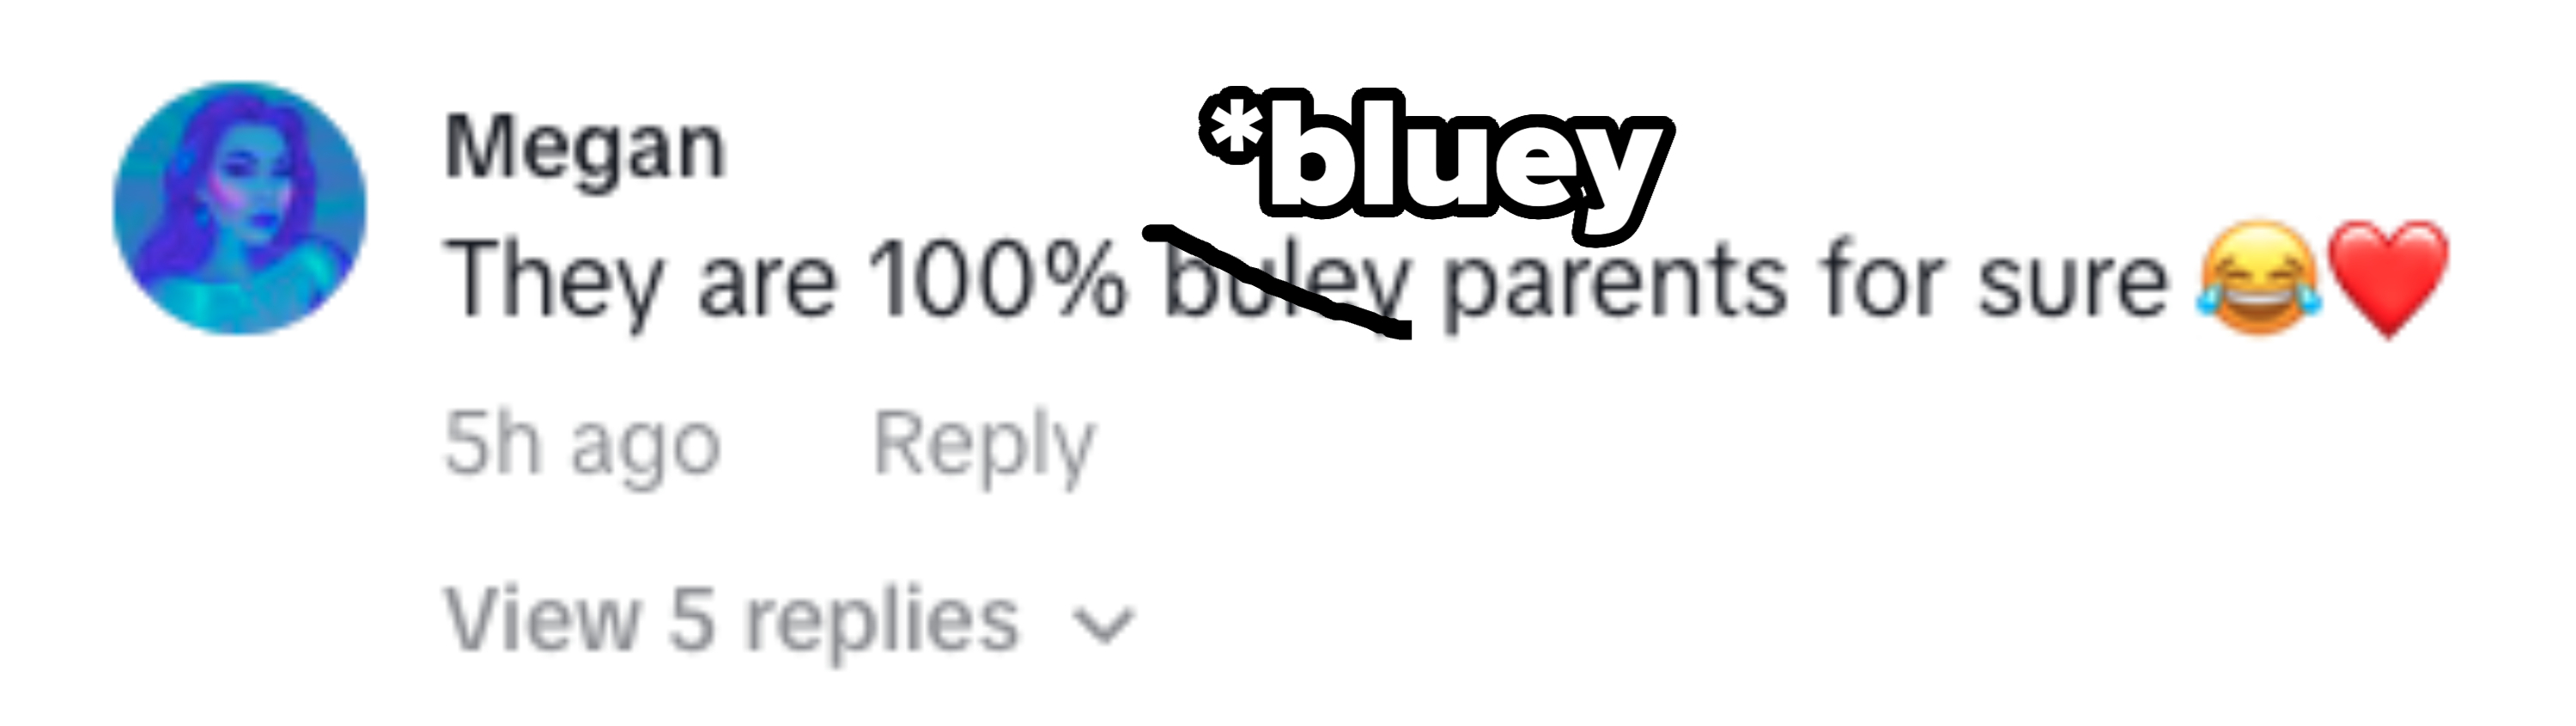 Social media comment praising someone as definite parents, with positive emojis